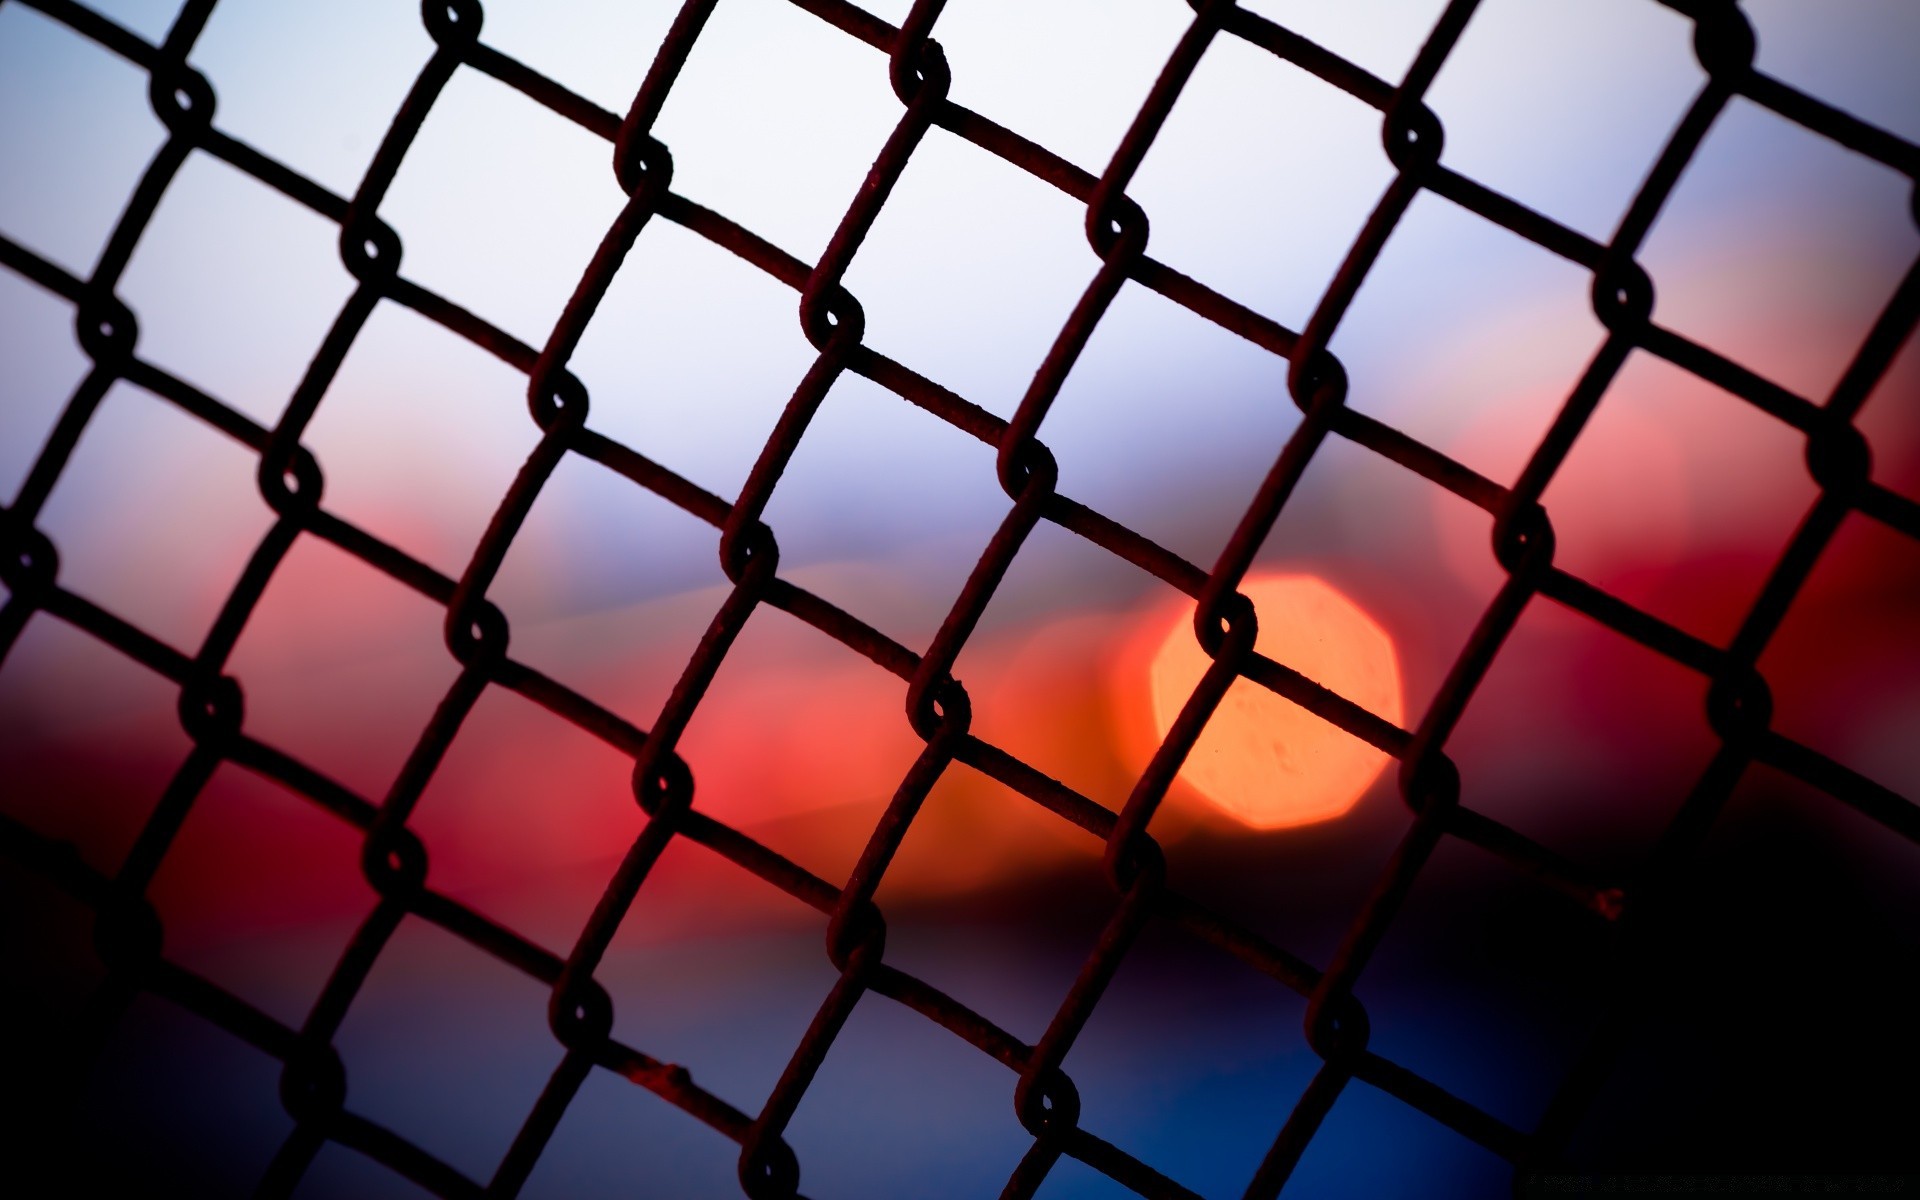 bokeh cage web grid abstract net iron fence desktop wire steel texture pattern jail